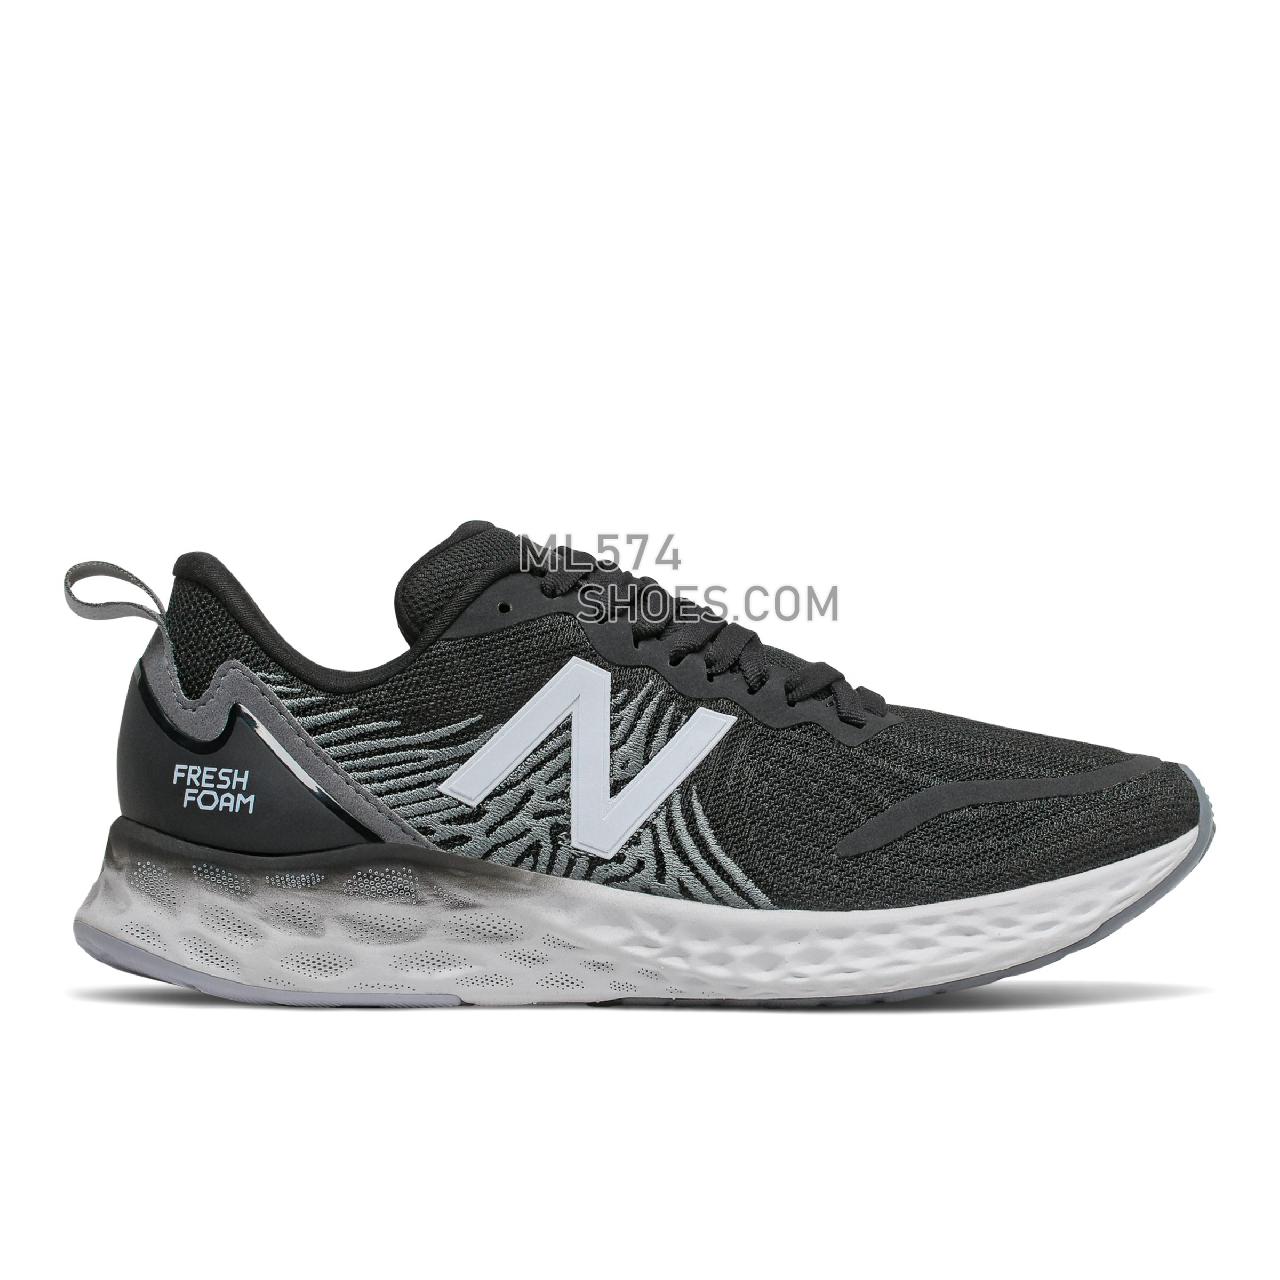 New Balance Fresh Foam Tempo - Women's Neutral Running - Black with Lead and Moon Dust - WTMPOBK